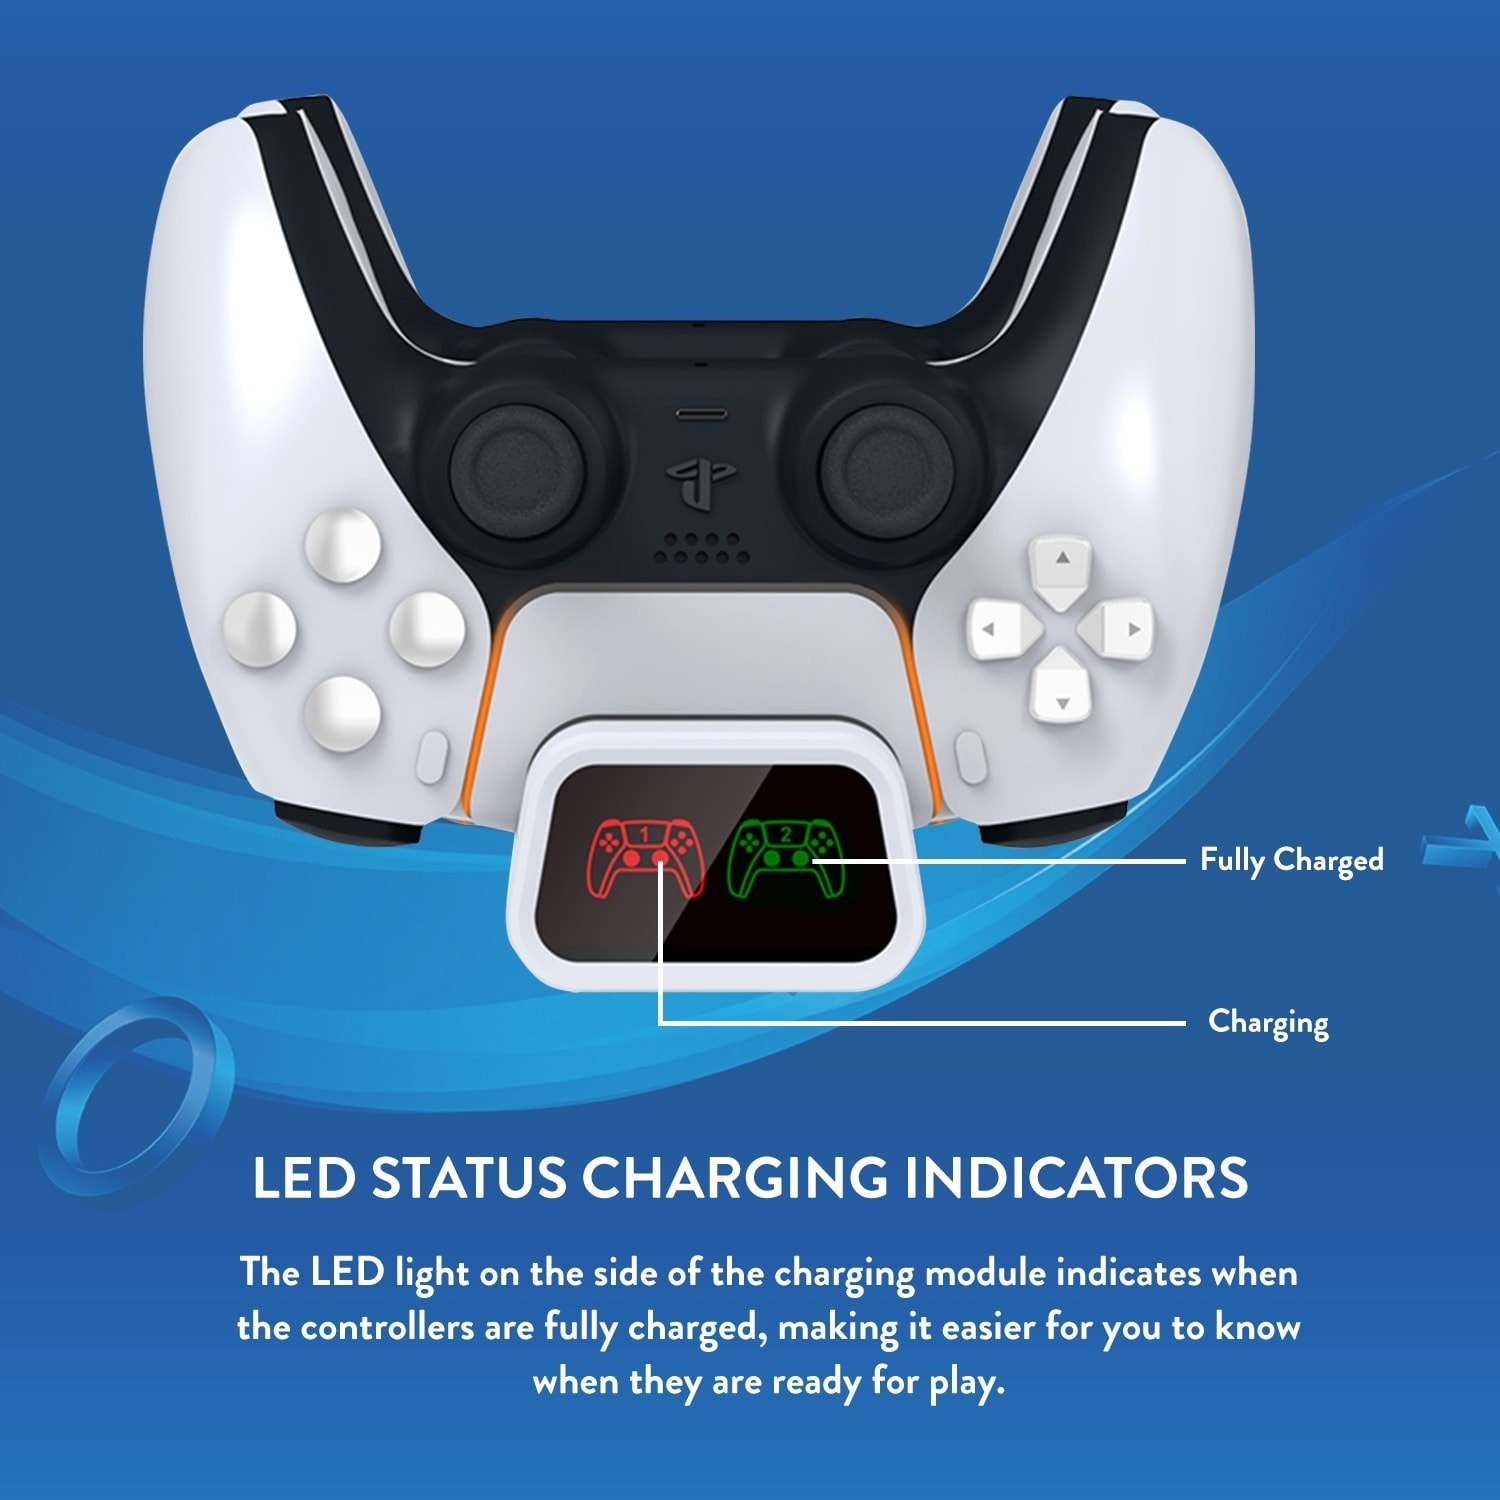 Chargeur Manette Ps5